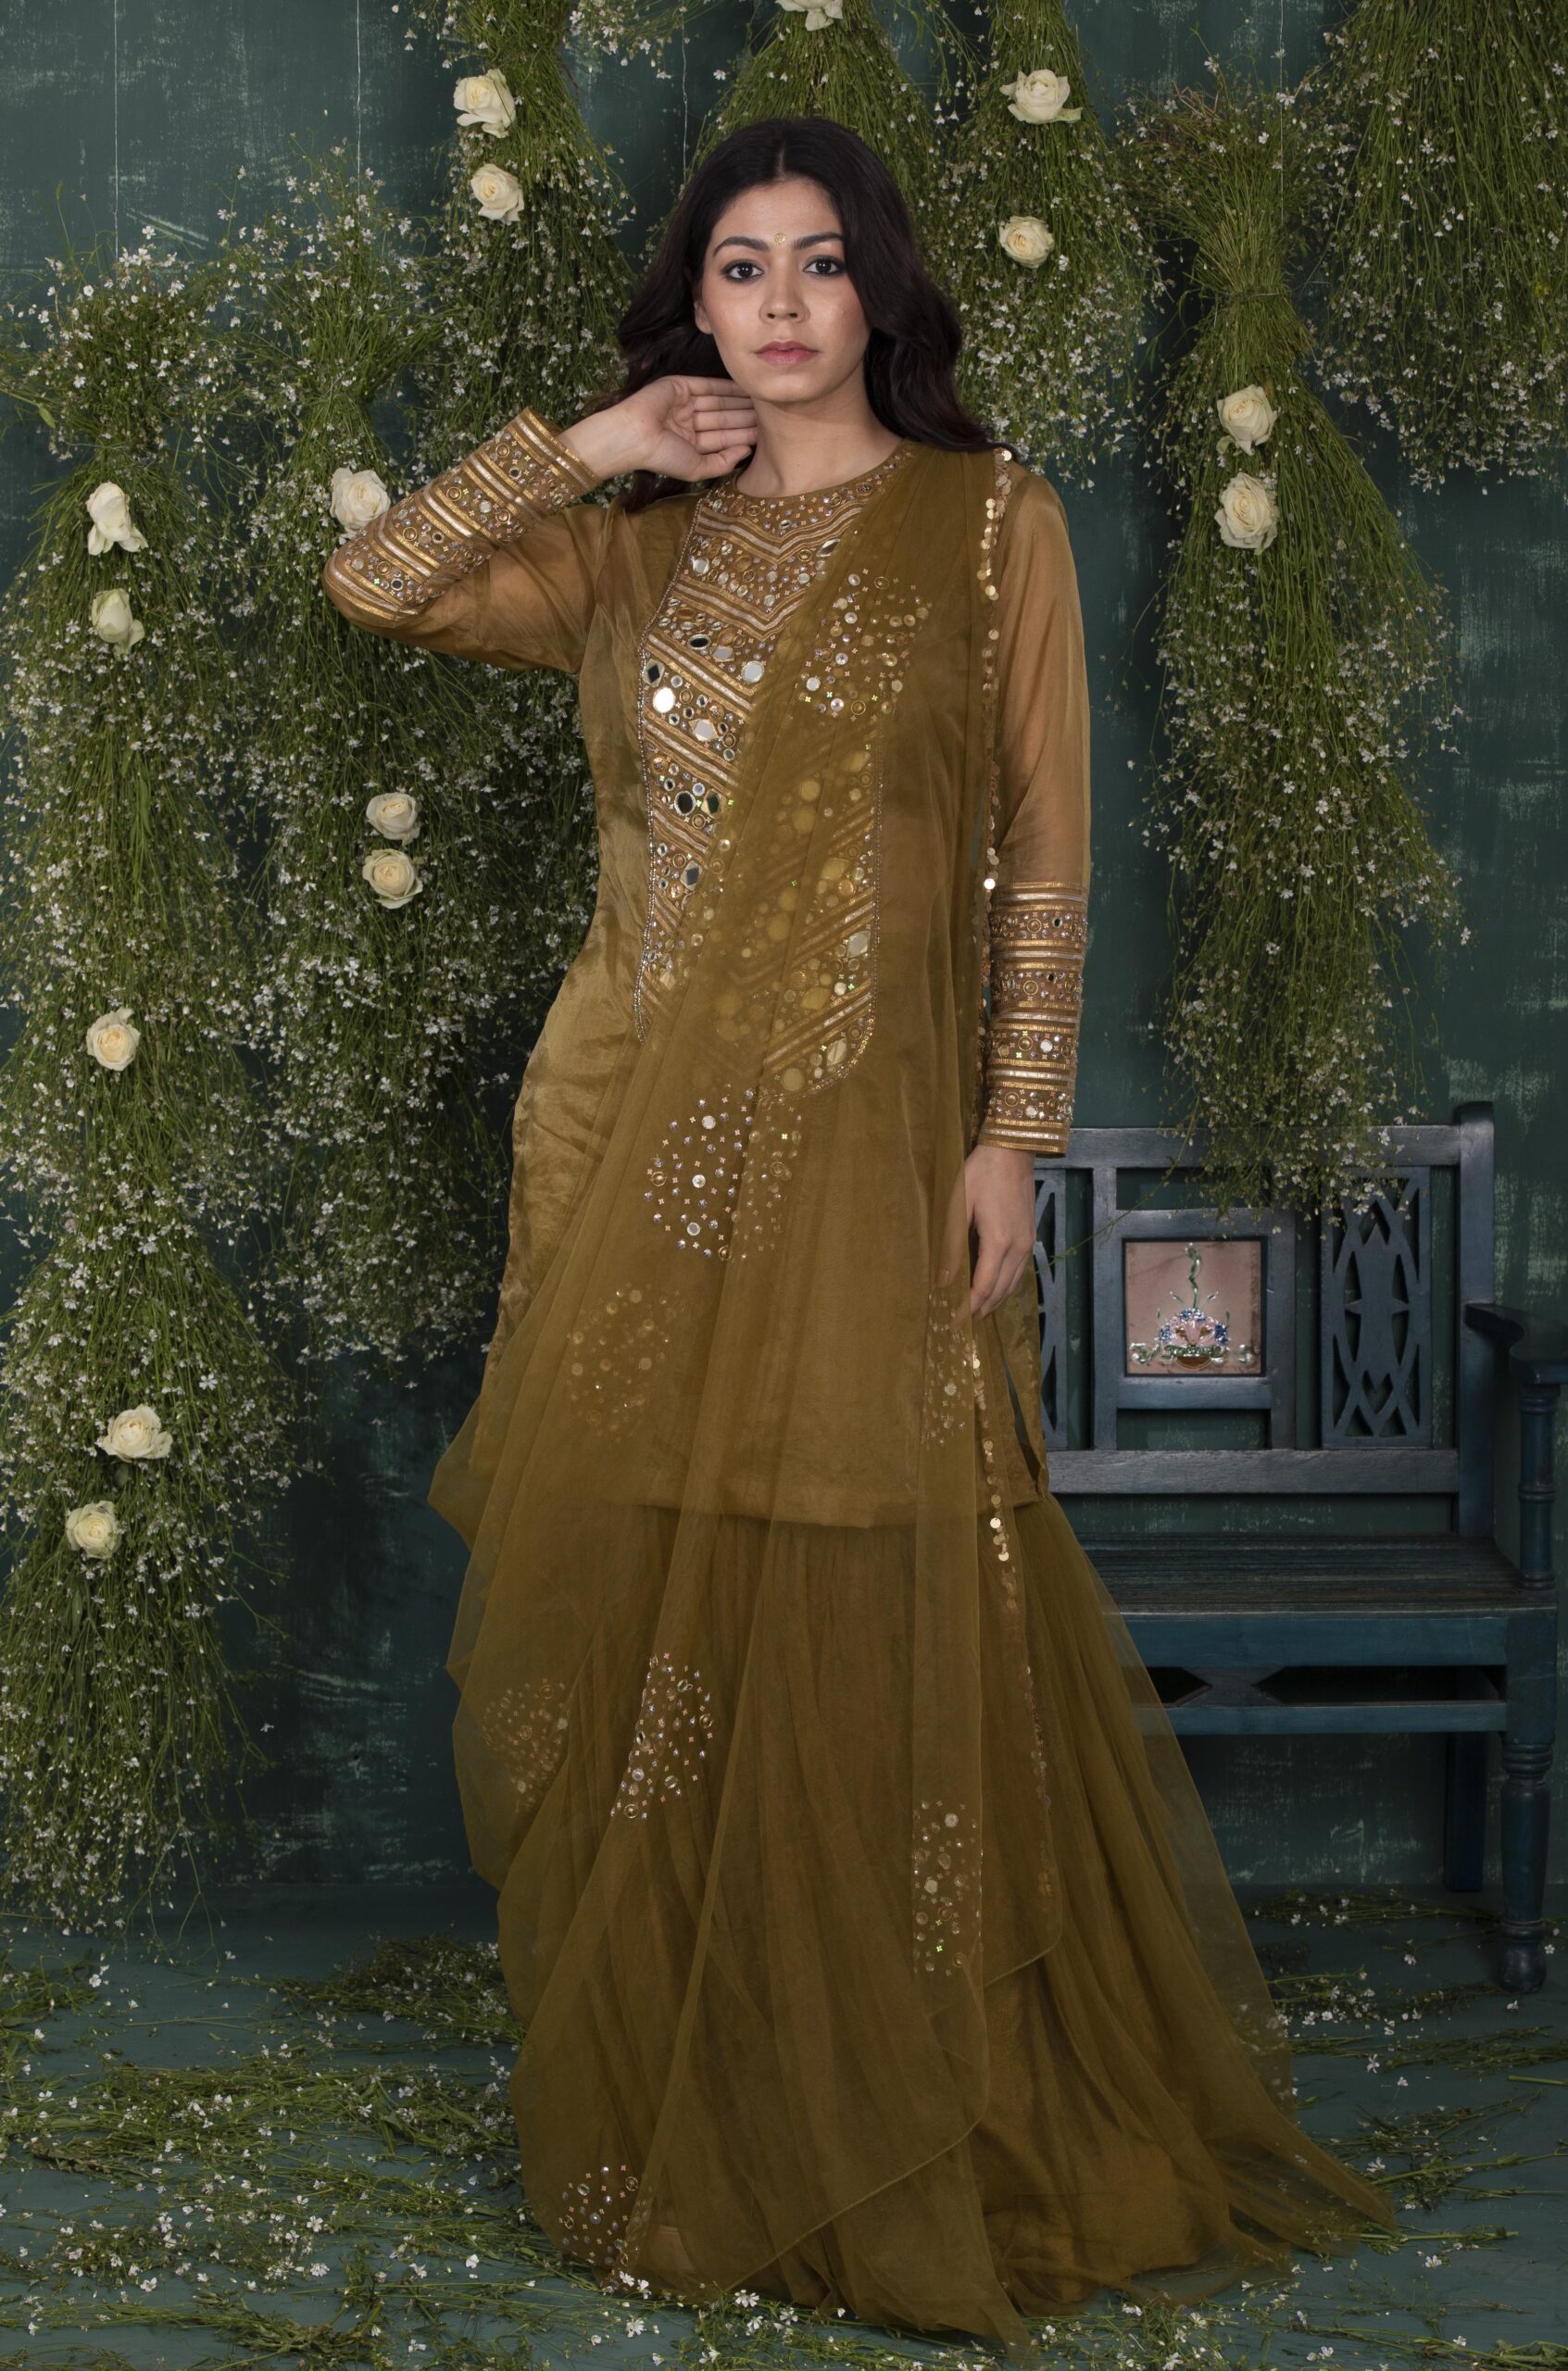 Reign like a queen, in this soothing, grouding and elegant olive green outfit